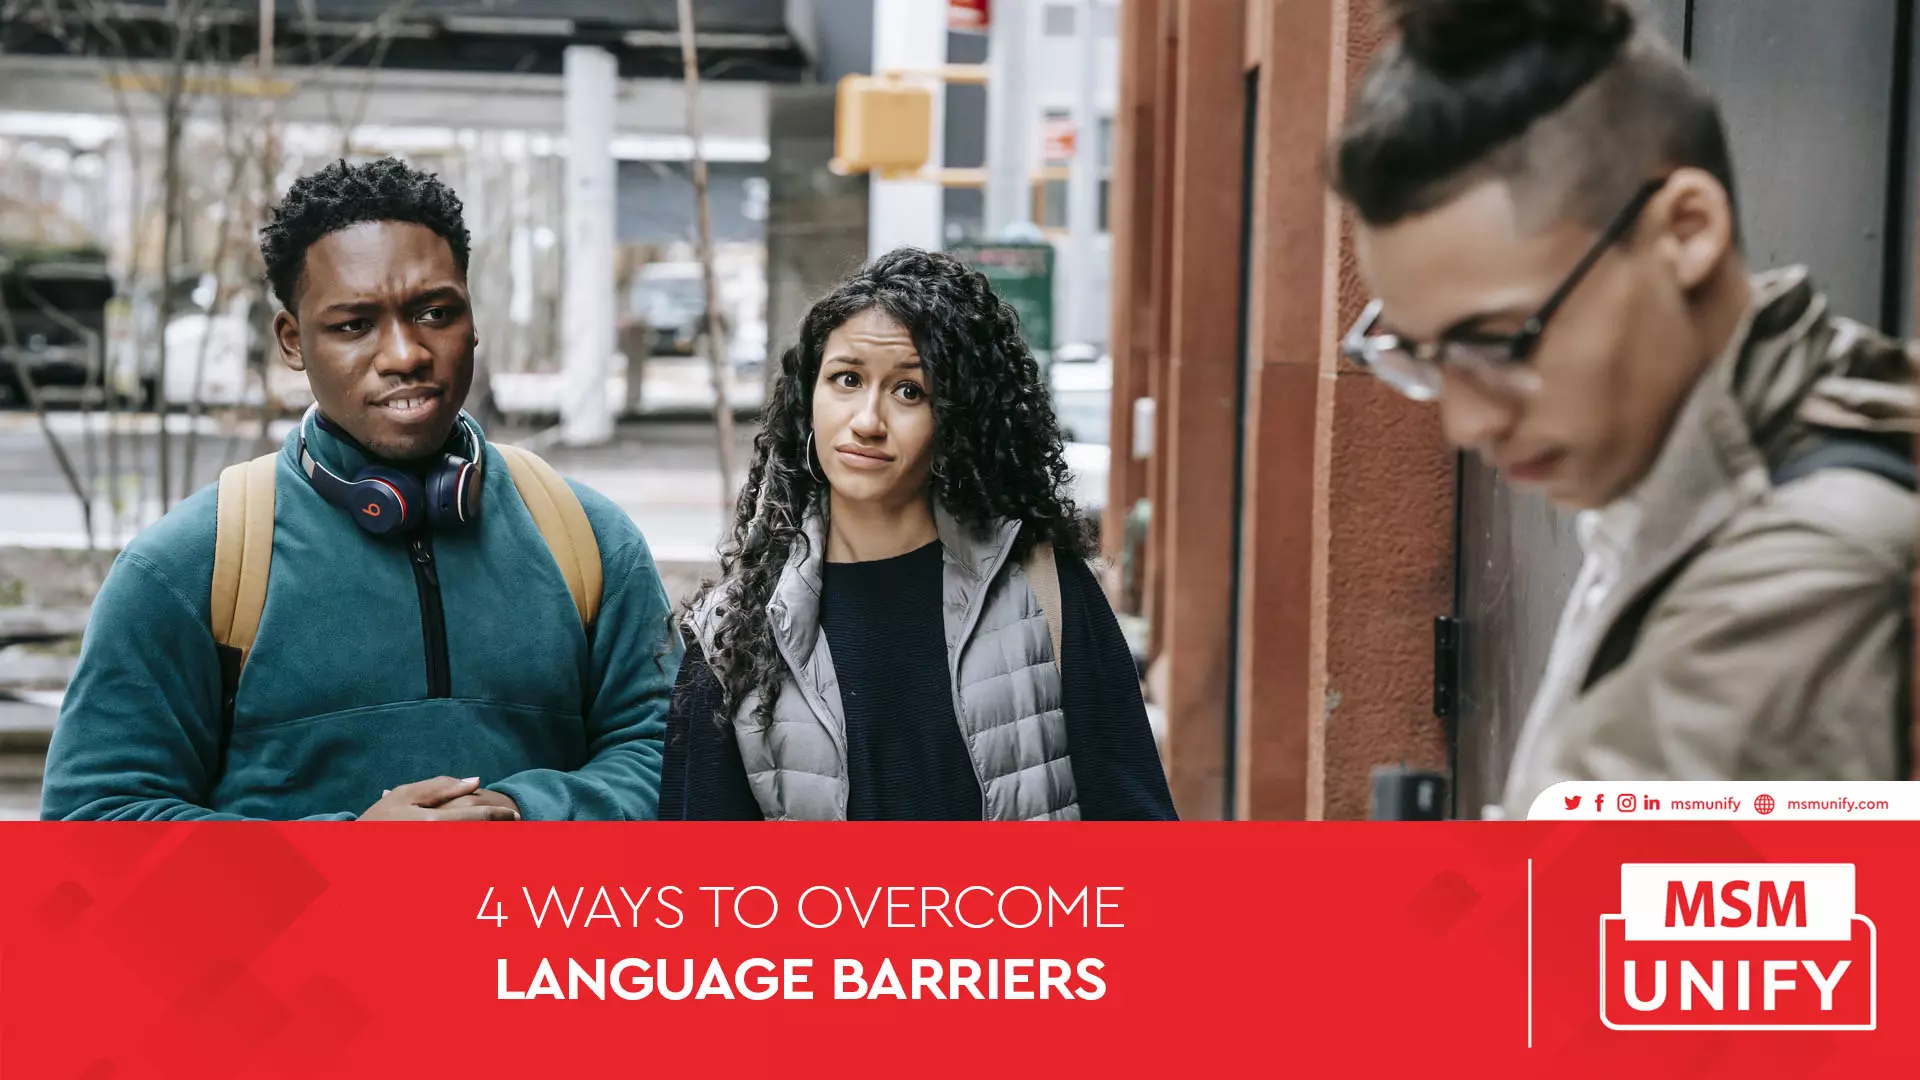 MSM Unify 4 Ways to Overcome Language Barriers